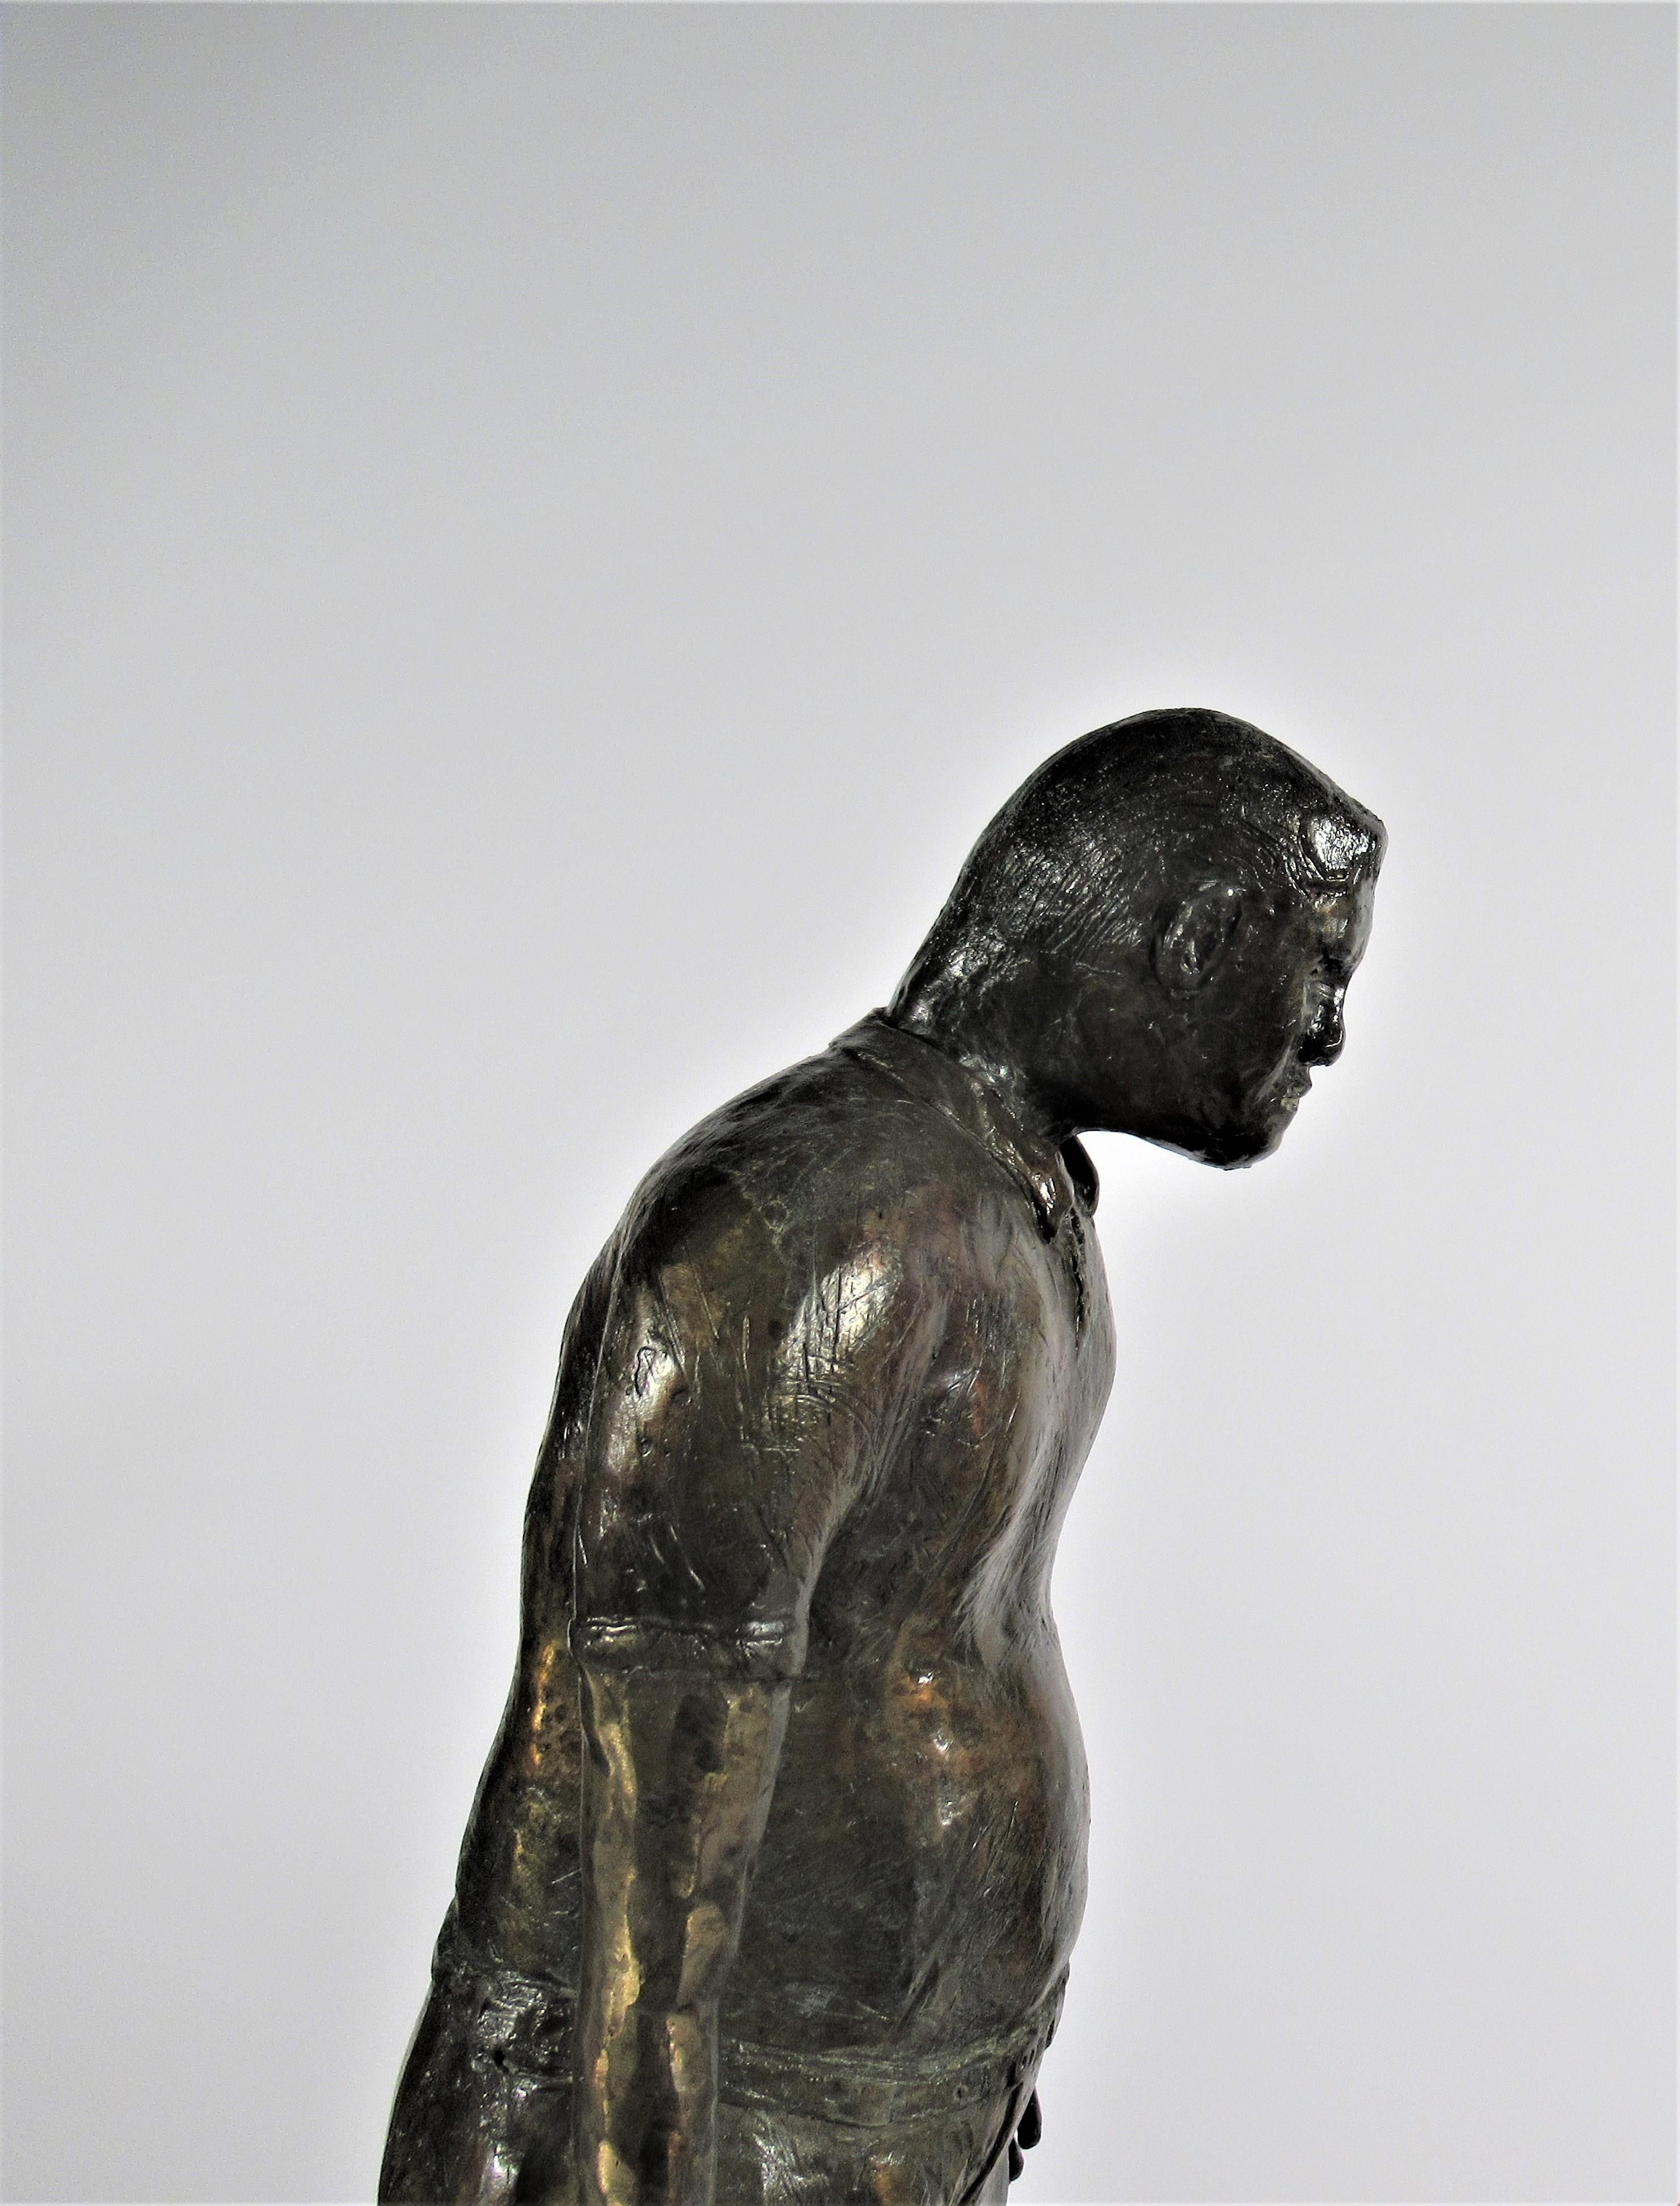 The Athlete and his Coach - Gold Figurative Sculpture by Kenneth Johnson